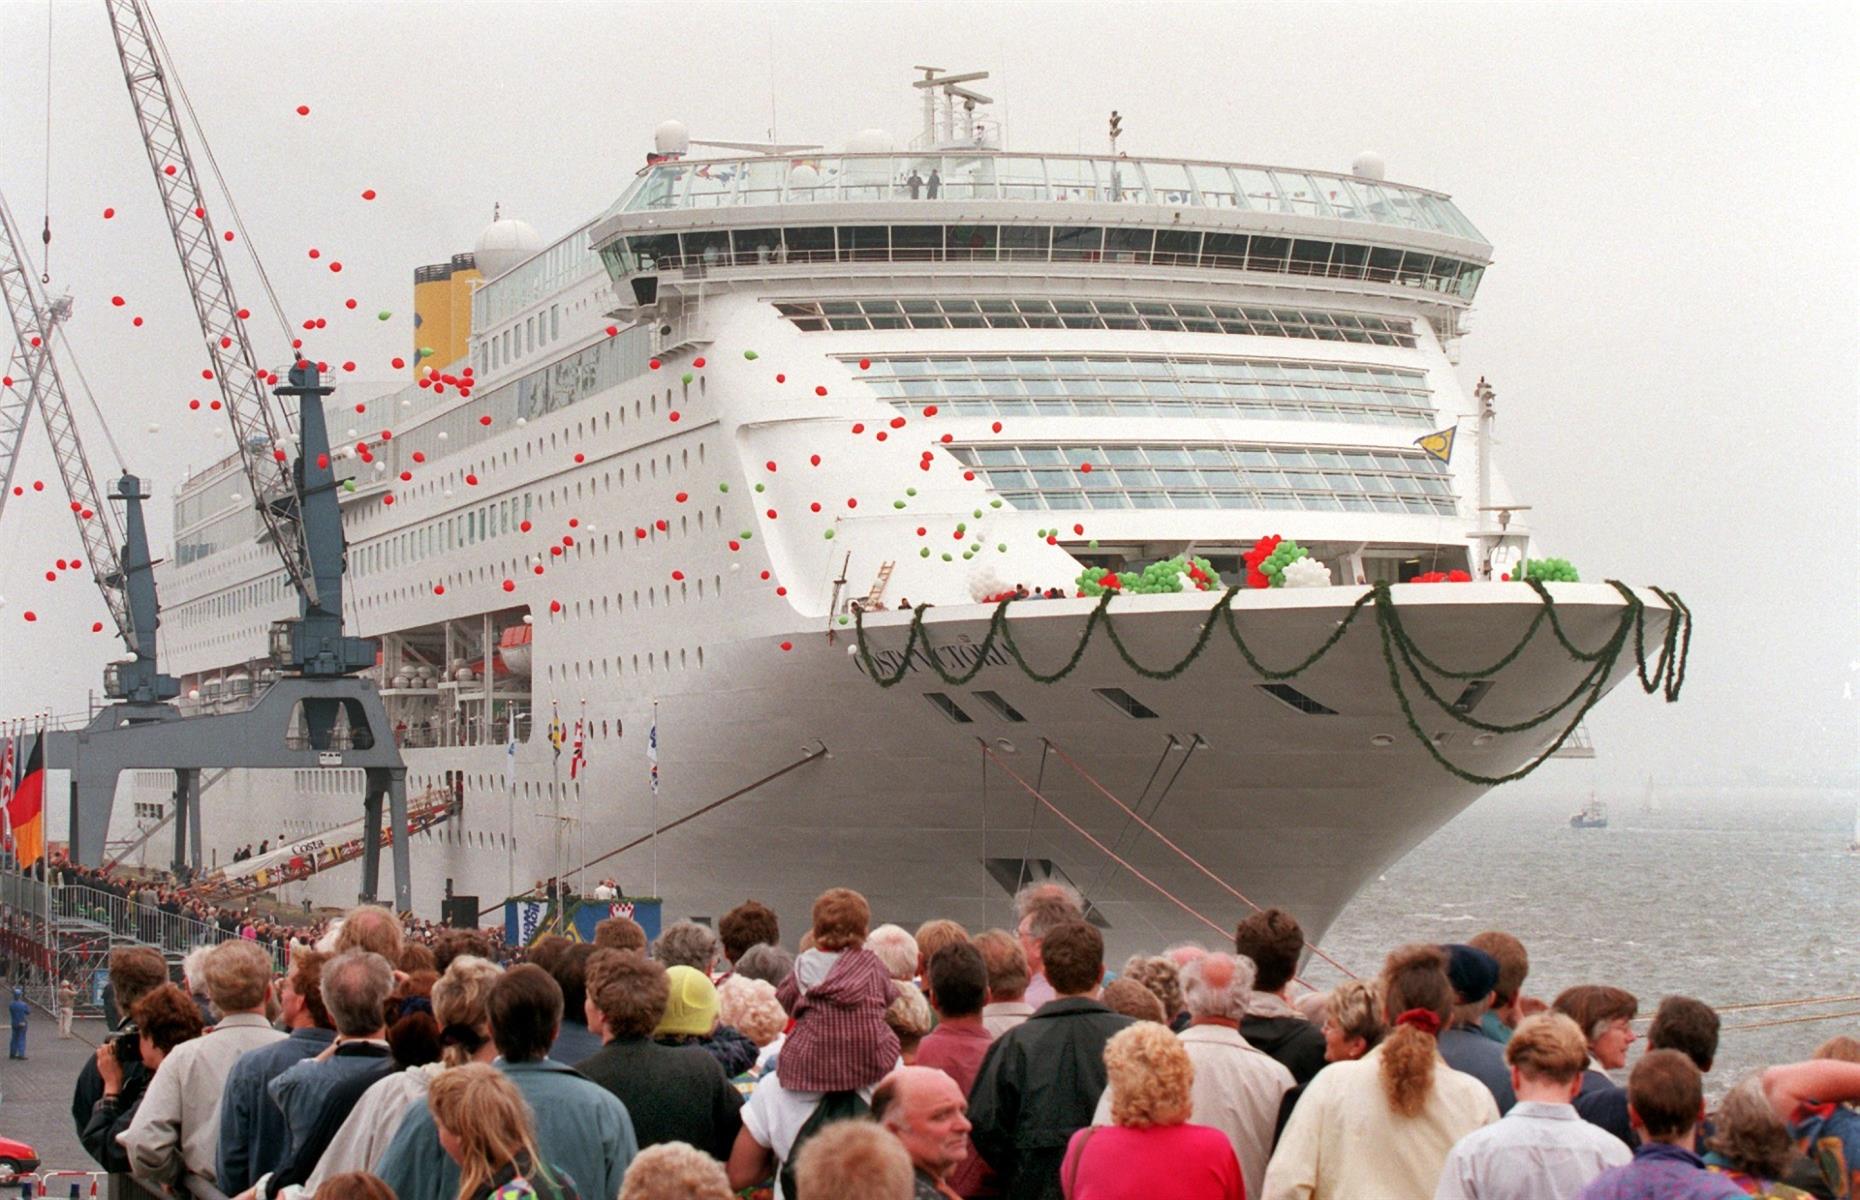 Distinctively designed with rows of windows at the front and a multi-storey observation lounge, the 2,394-passenger Costa Victoria was built in 1996 in a record time of 29 months. During service the ship spent a lot of time in Asia, and had an Italian-inspired refit in 2013.